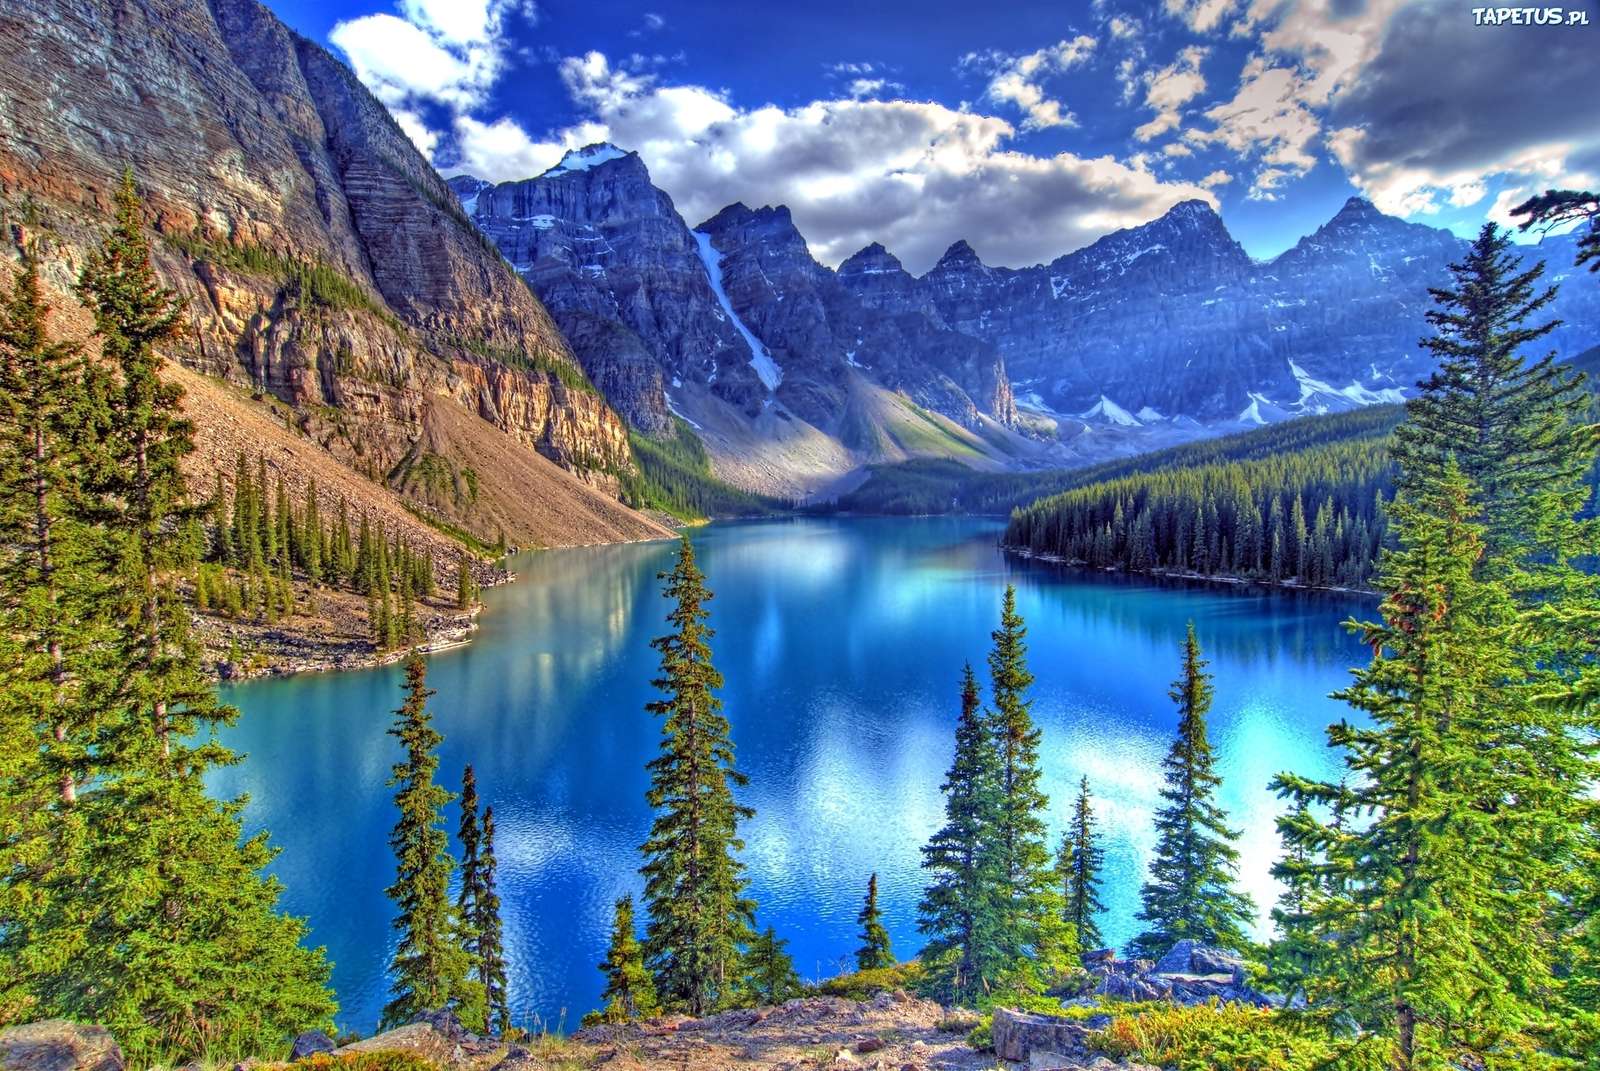 An extraordinary moraine lake online puzzle